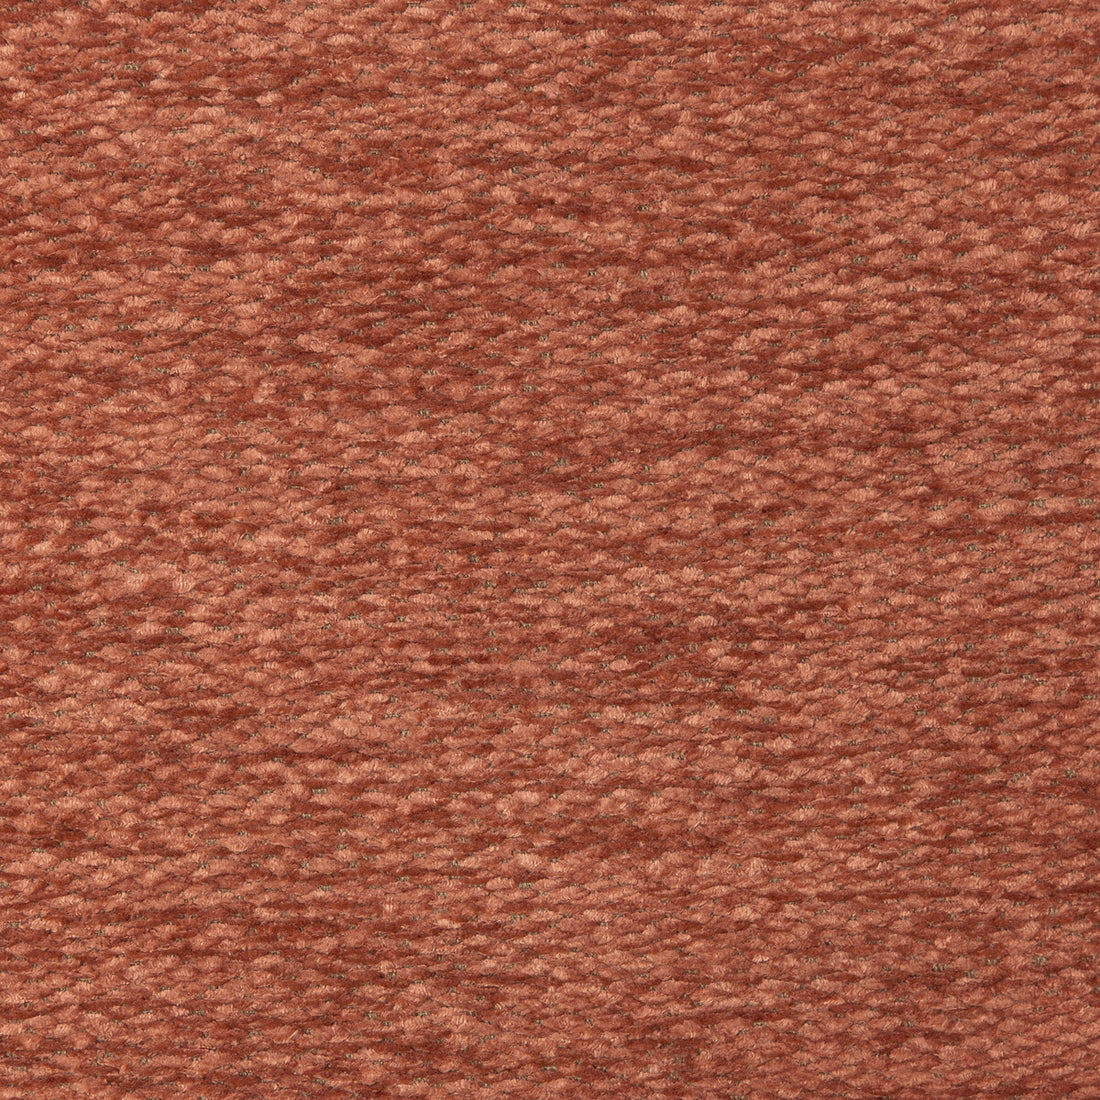 Clery Texture fabric in rust color - pattern 8019150.24.0 - by Brunschwig &amp; Fils in the Chambery Textures II collection